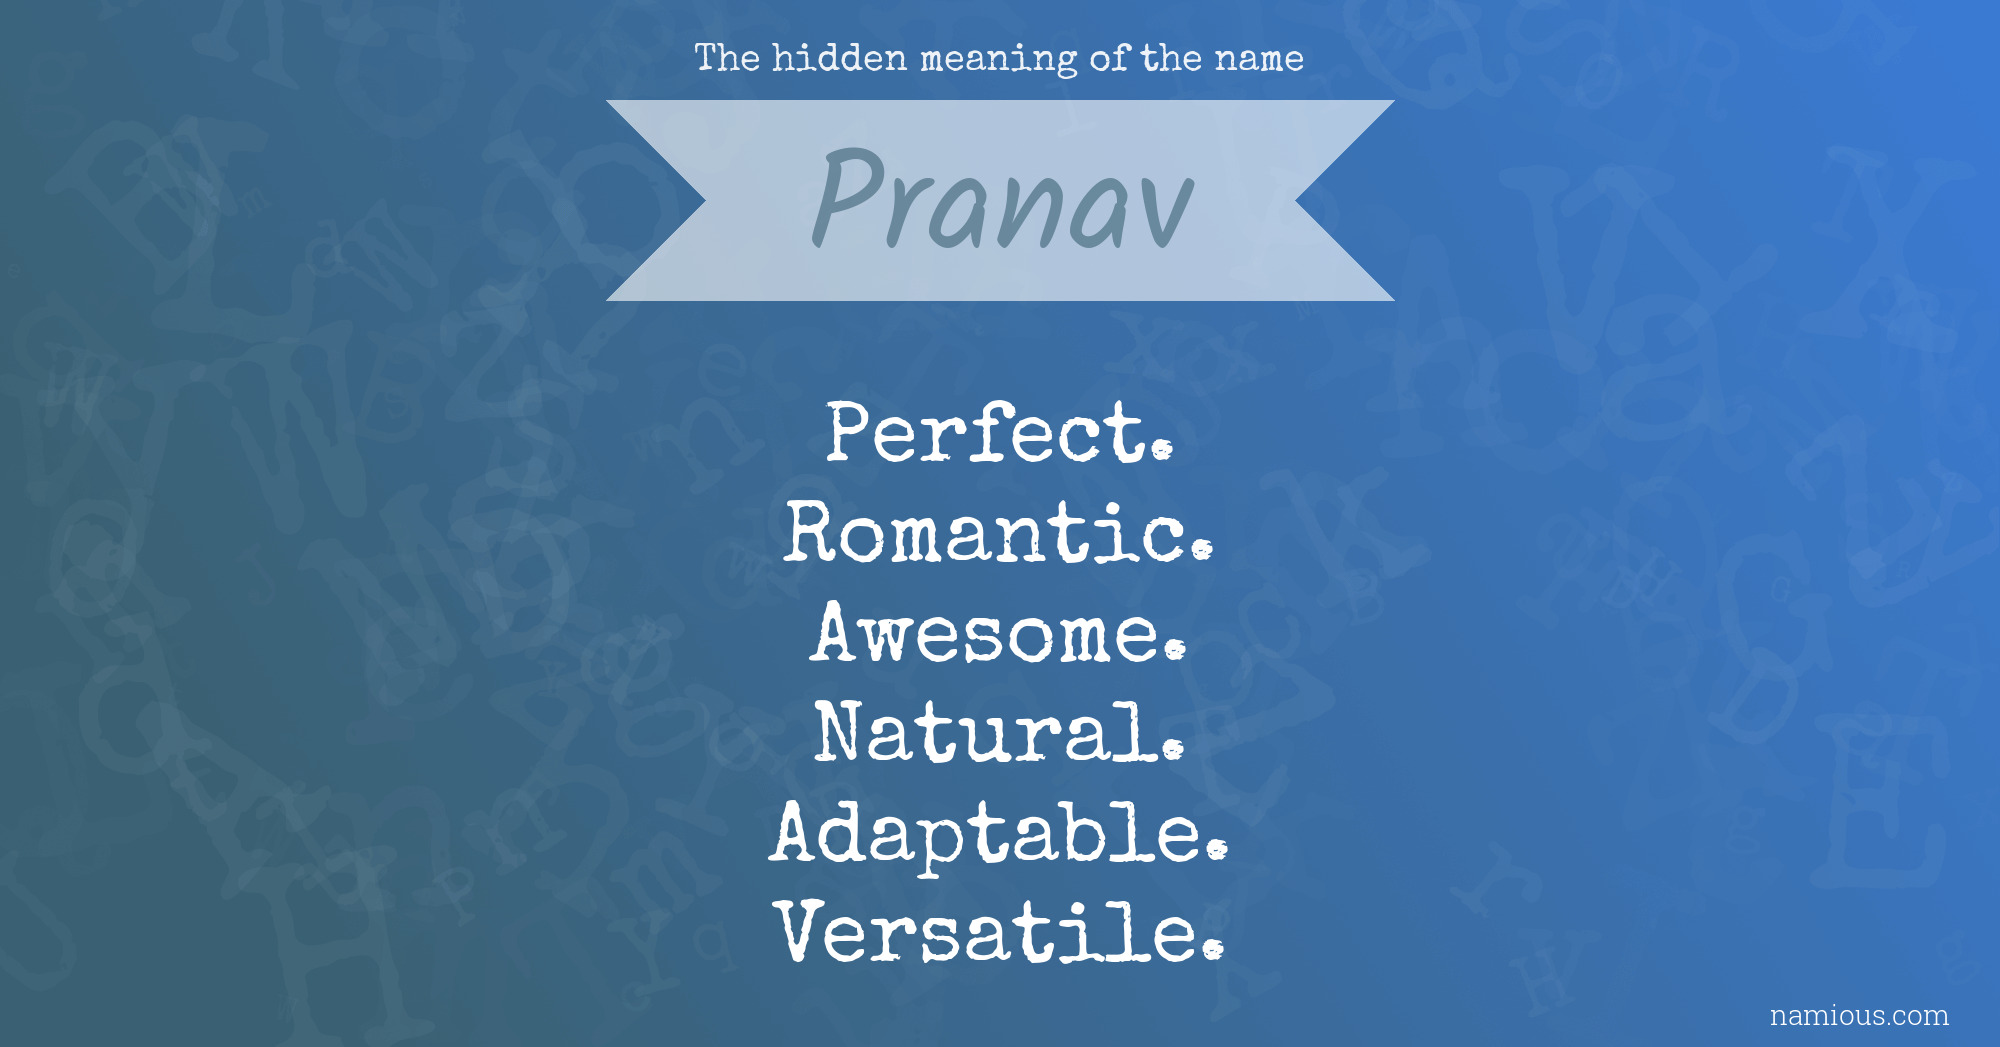 The hidden meaning of the name Pranav